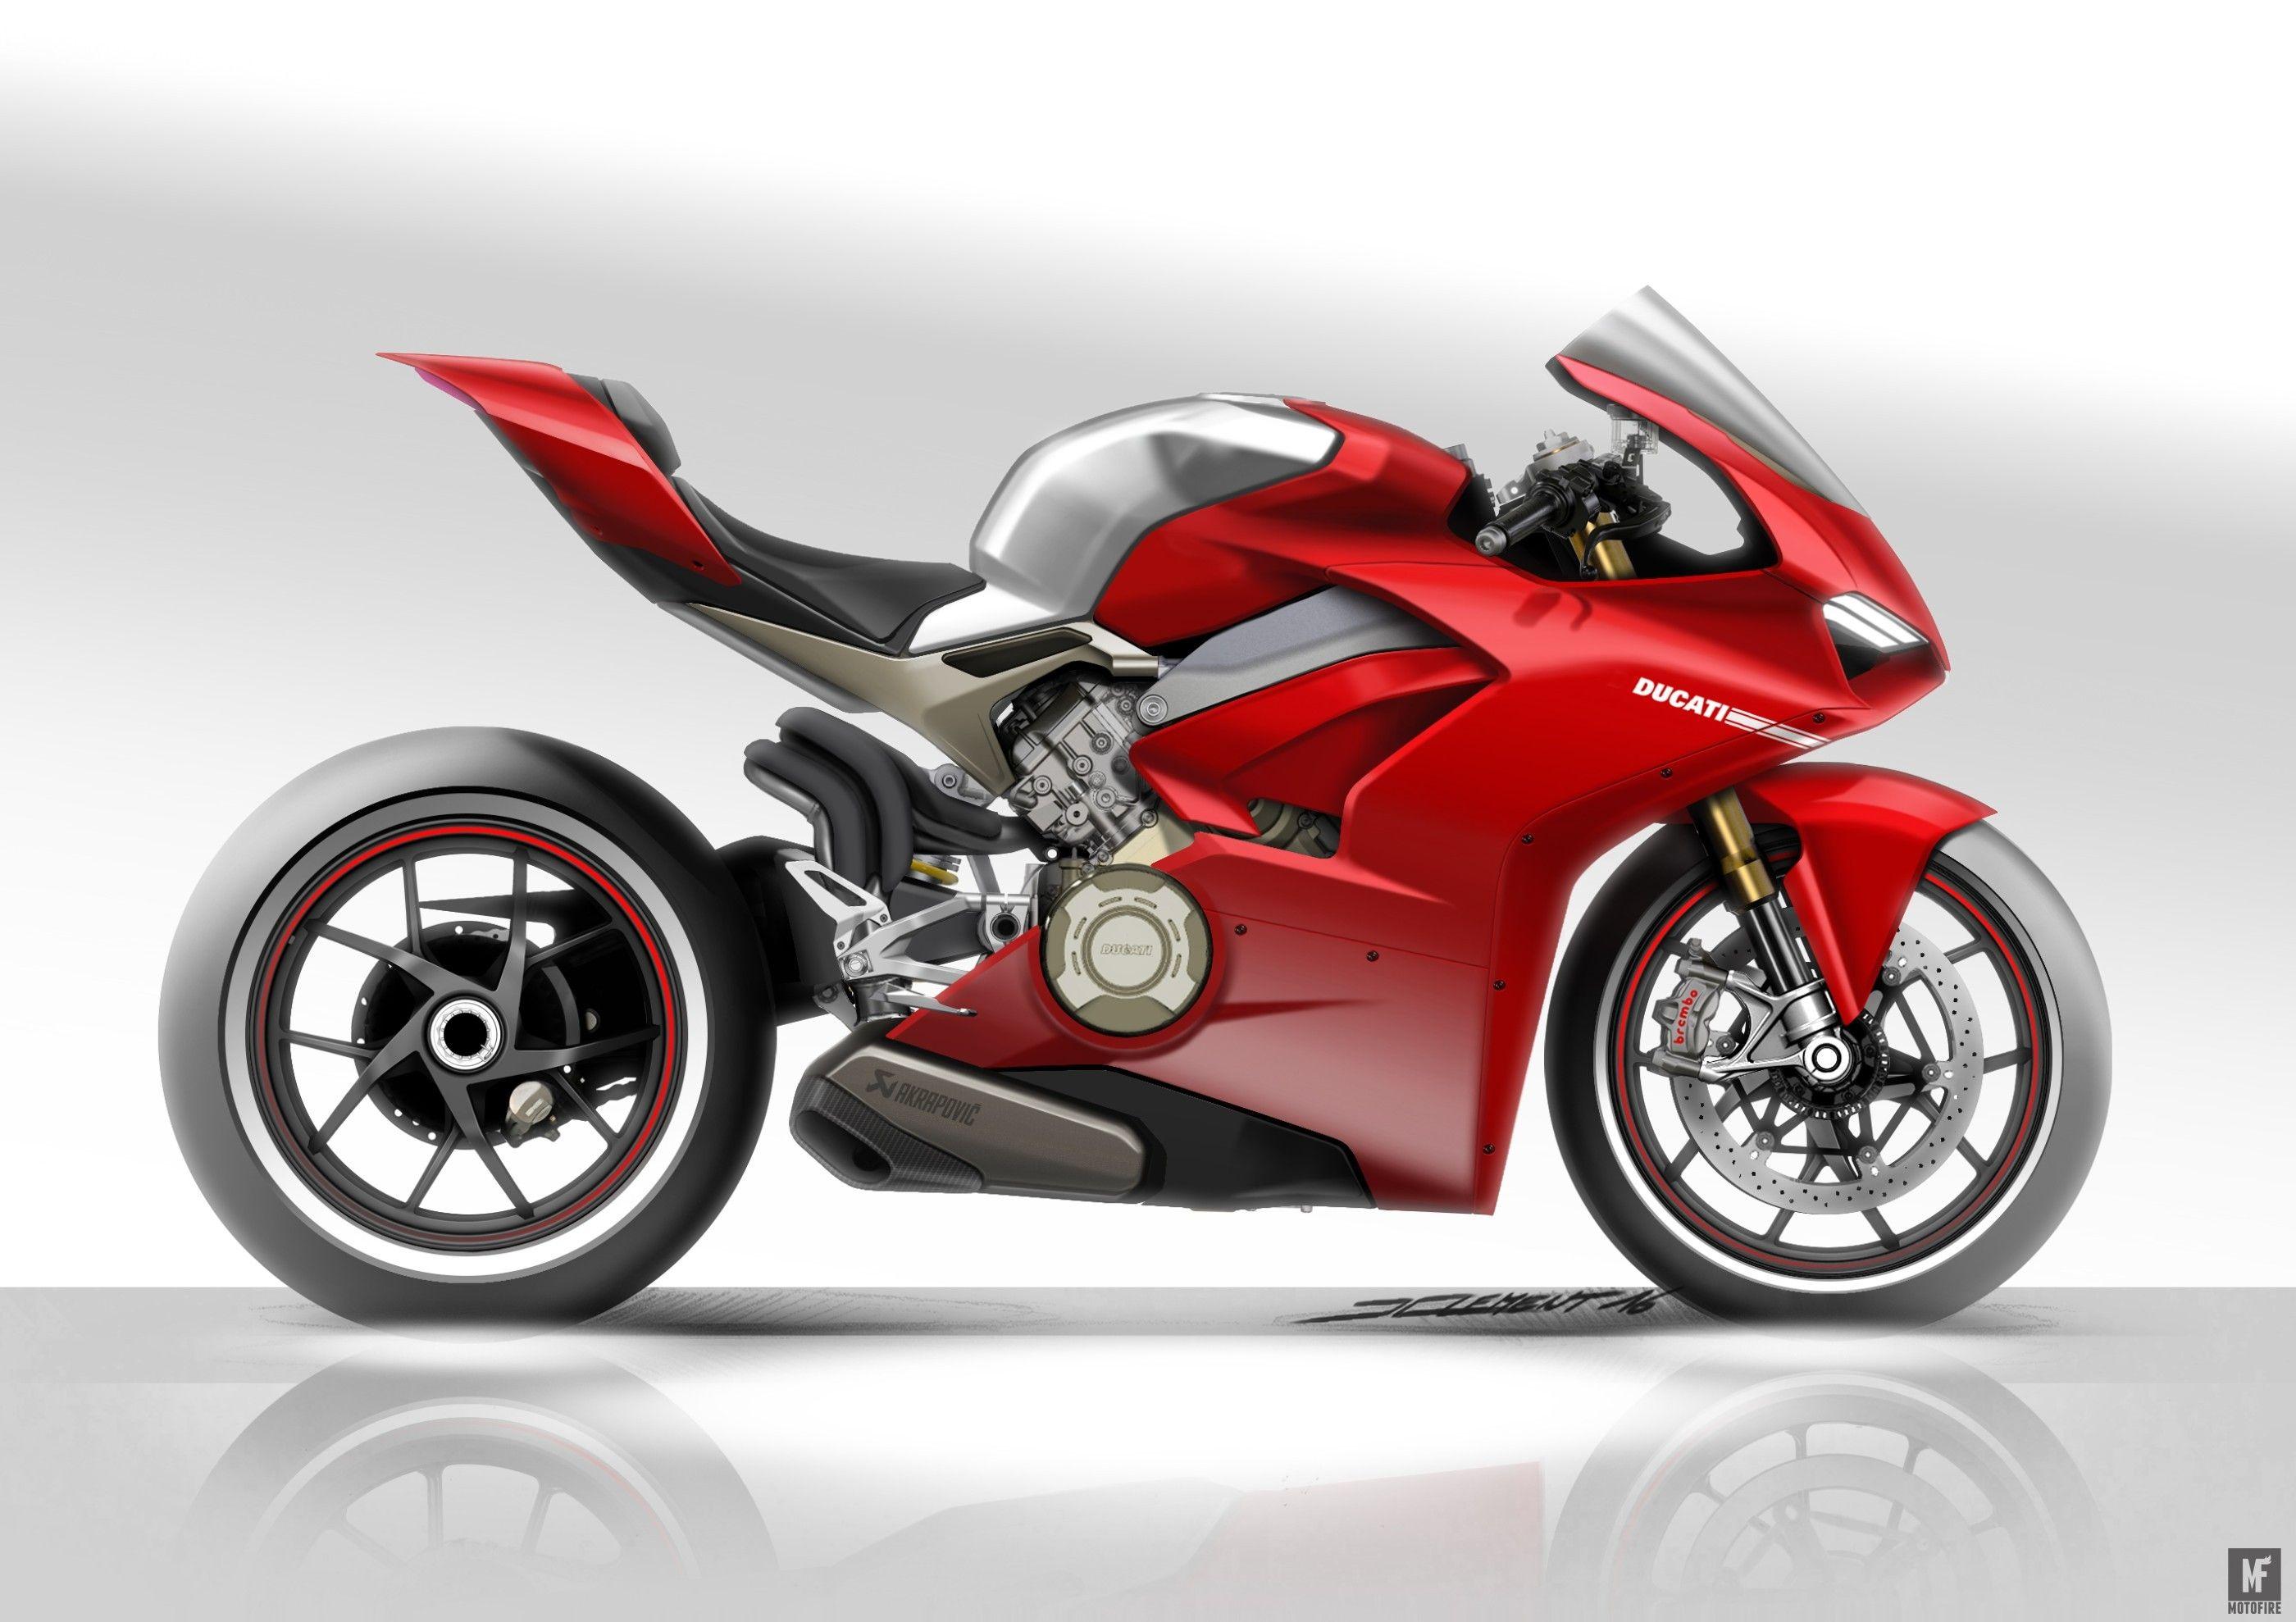 The design sketches for the Ducati Panigale V4 are stunning!